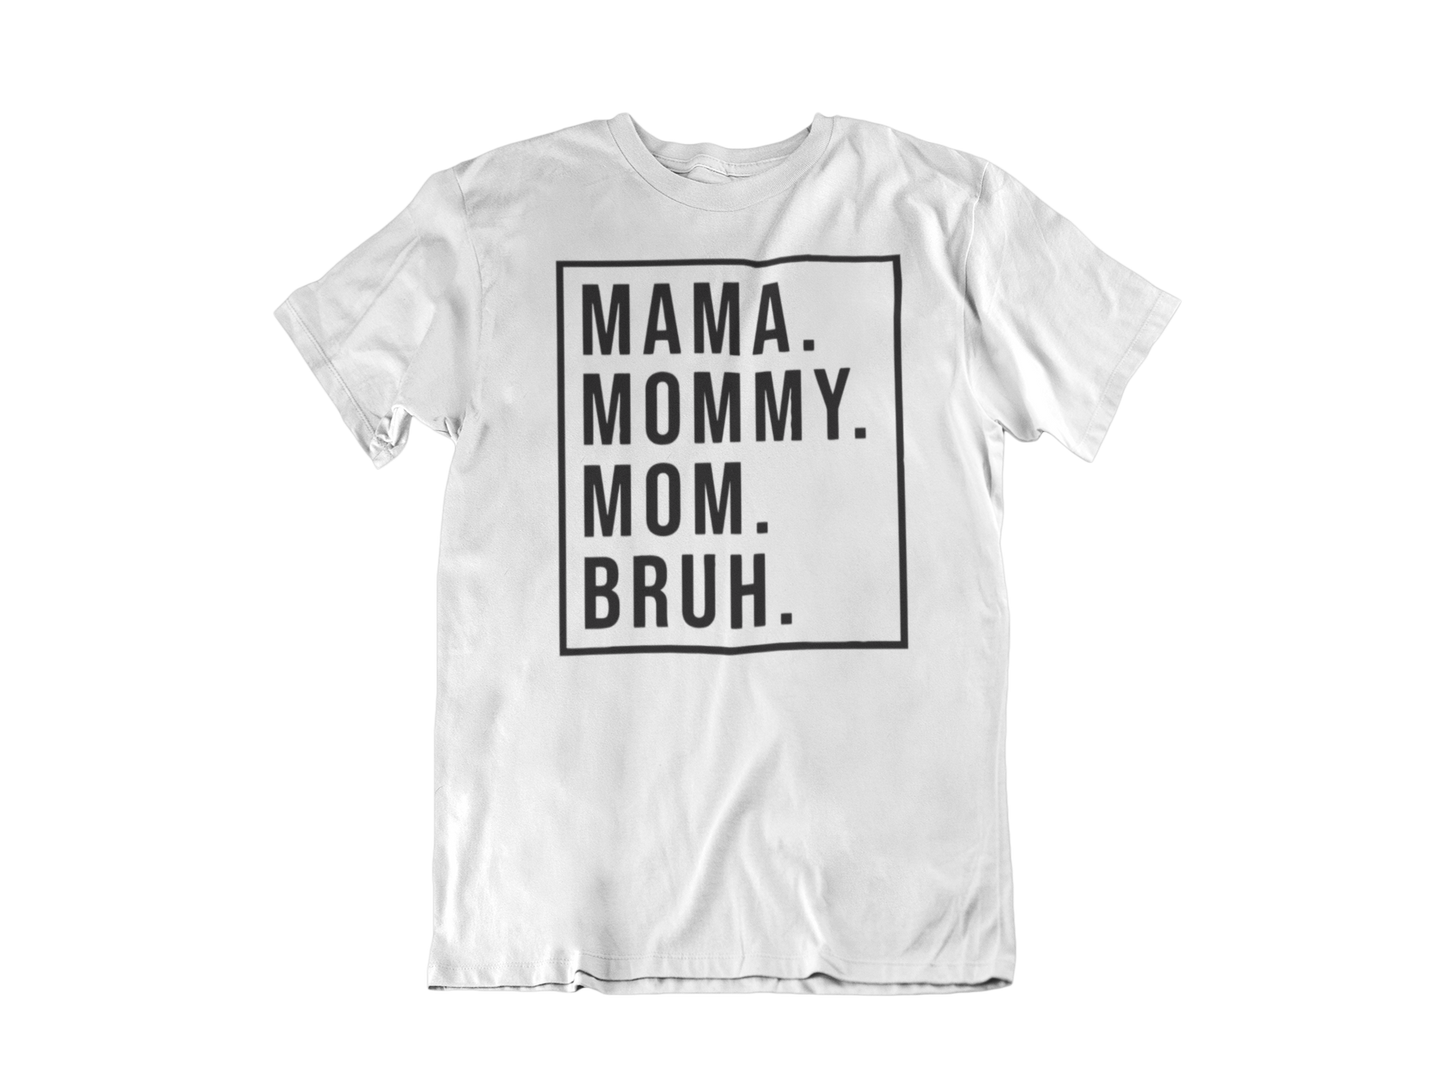 Mama. Mommy. Mom. BRUH. - Full Color Heat Transfer – WineandWhiskeyCo